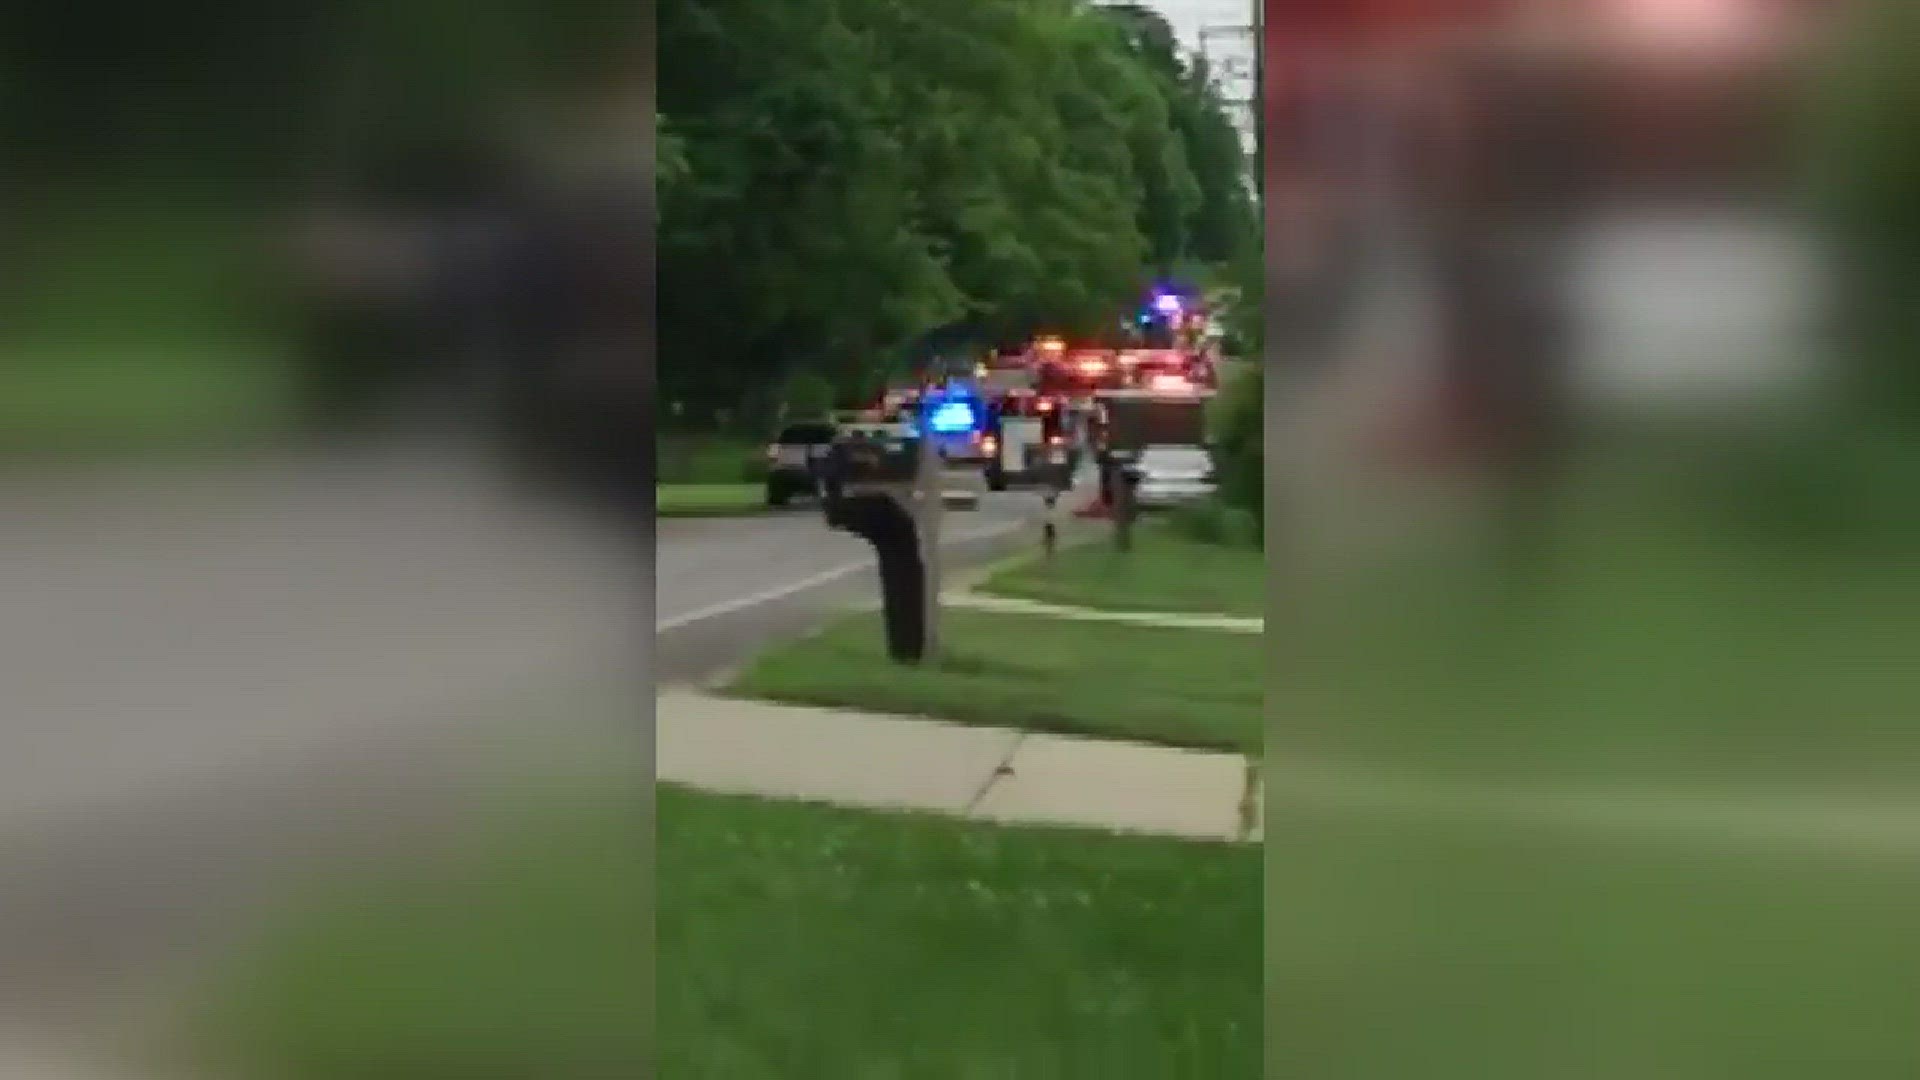 A pickup truck driver crashed into a group of bicyclists, killing at least five people, Tuesday, June 7, near Kalamazoo. Video: Melissa Kellogg